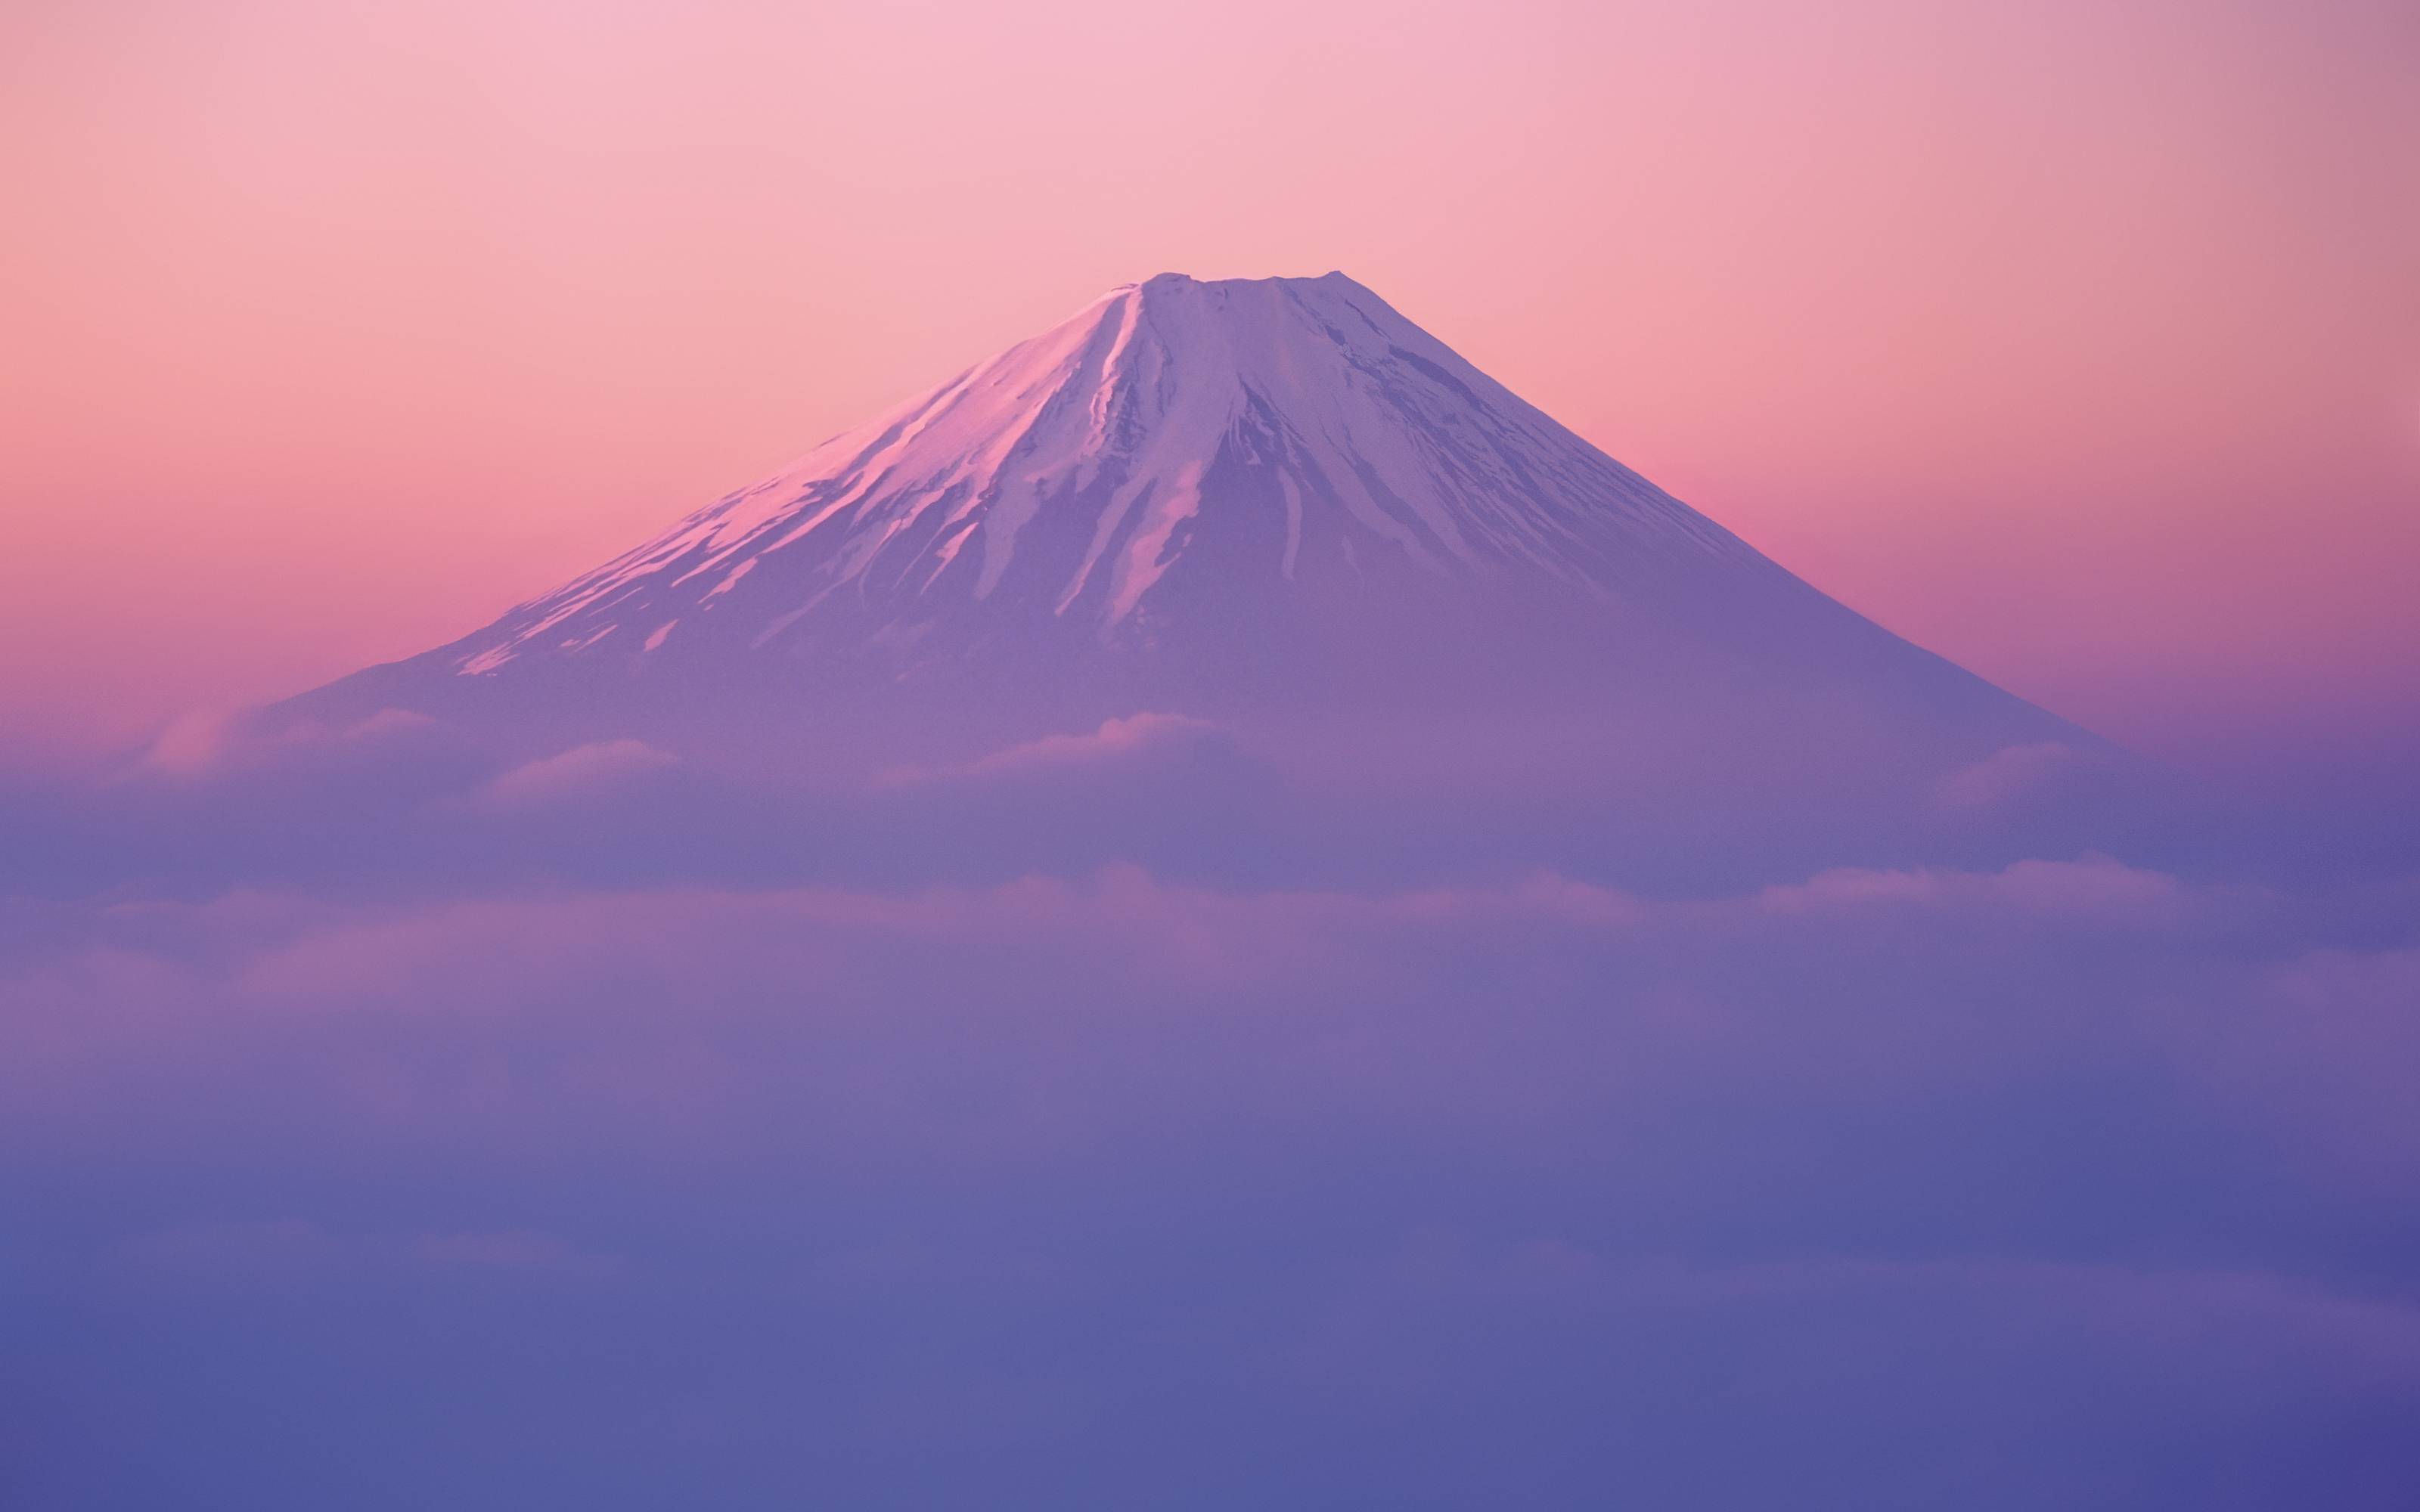 New Mt Fuji Wallpapers in Mac OS X Lion Developer Preview 2